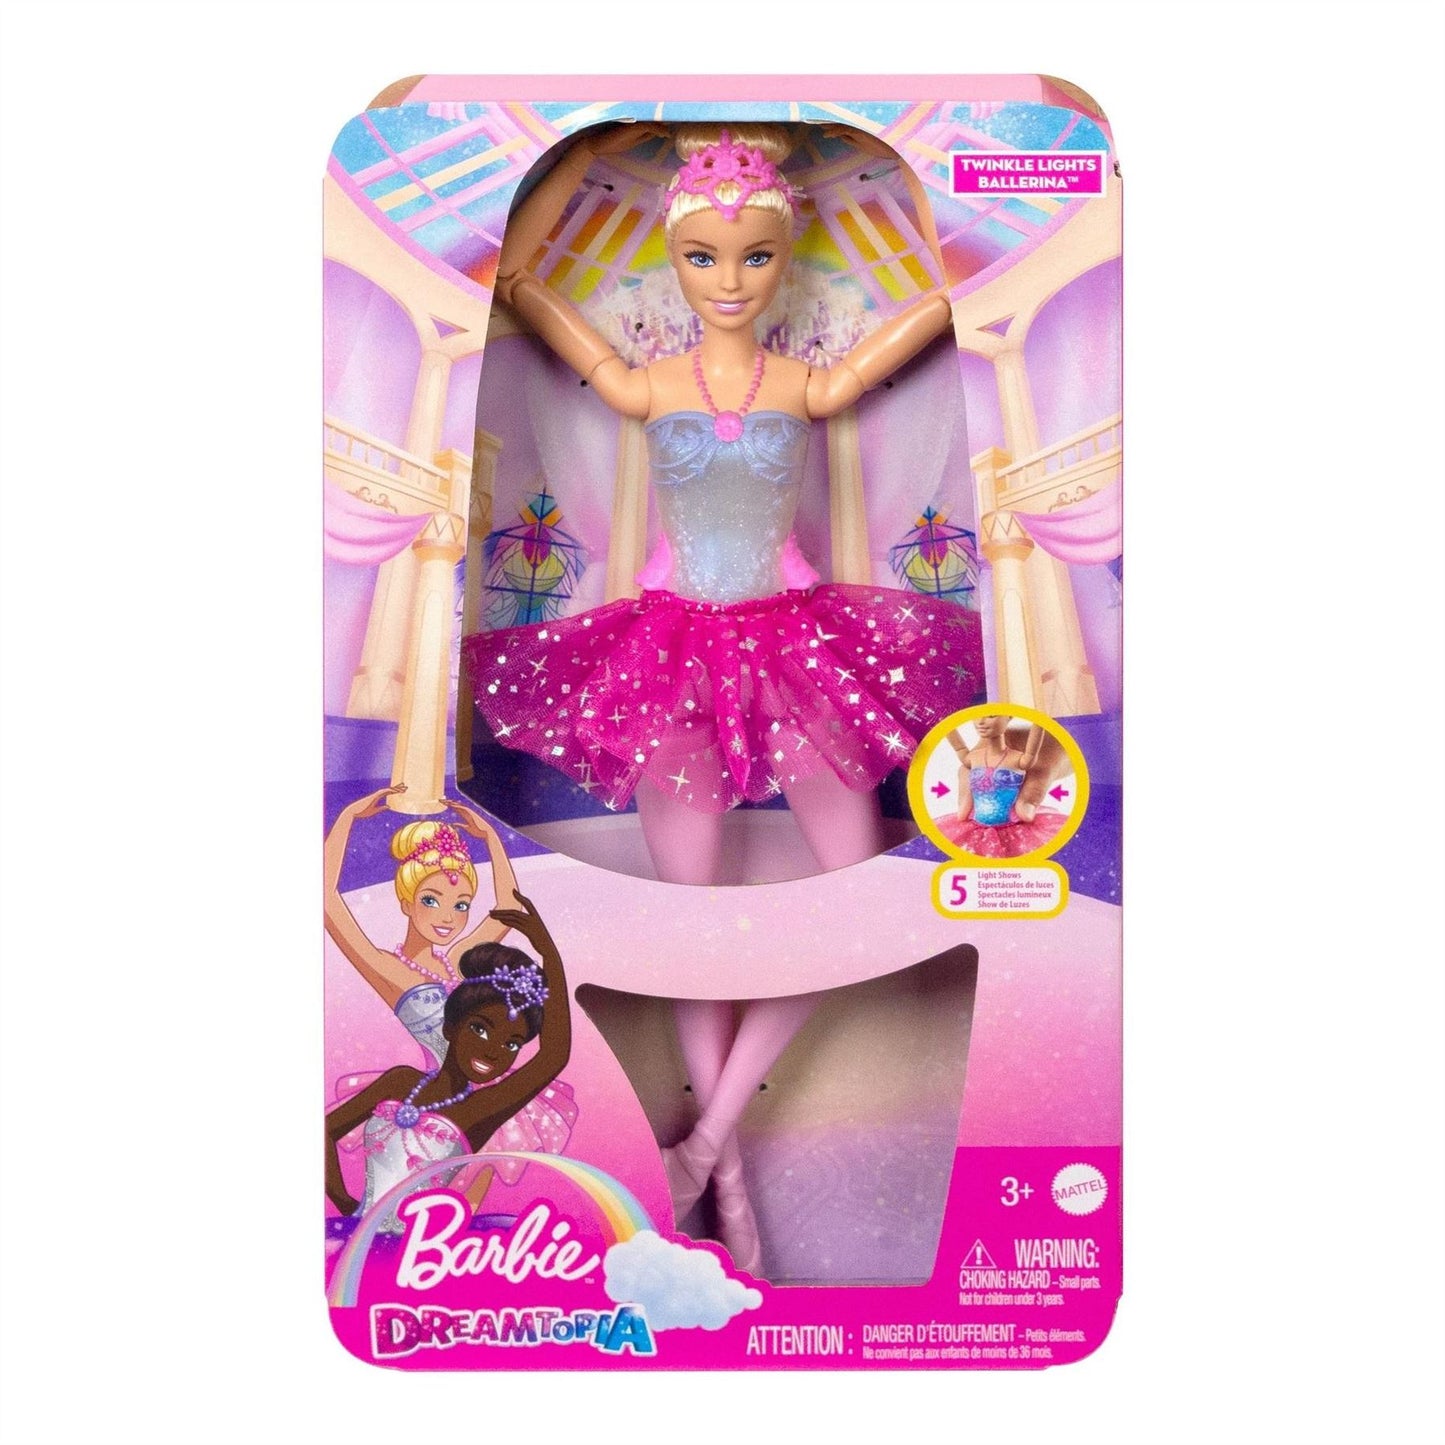 Barbie Twinkle Lights Feature Ballerina Doll - 29cm, Barbie Doll, Magical Ballerina Doll | Blonde Hair, Light-Up Feature, Tiara and Pink Tutu, Ballet Dancing, Poseable, Kids Toys, official licensed barbie toy, barbie's iconic home, make your own, barbie doll, spencer doll, Chelsea doll, barbie, skipper, barbie beach, barbie beach house, barbie beach house, barbie beach bungalow, barbie beach doll, barbie beach house with pool, barbie beach cruiser, mega bloks barbie beach house, barbie beach towel, barbie b